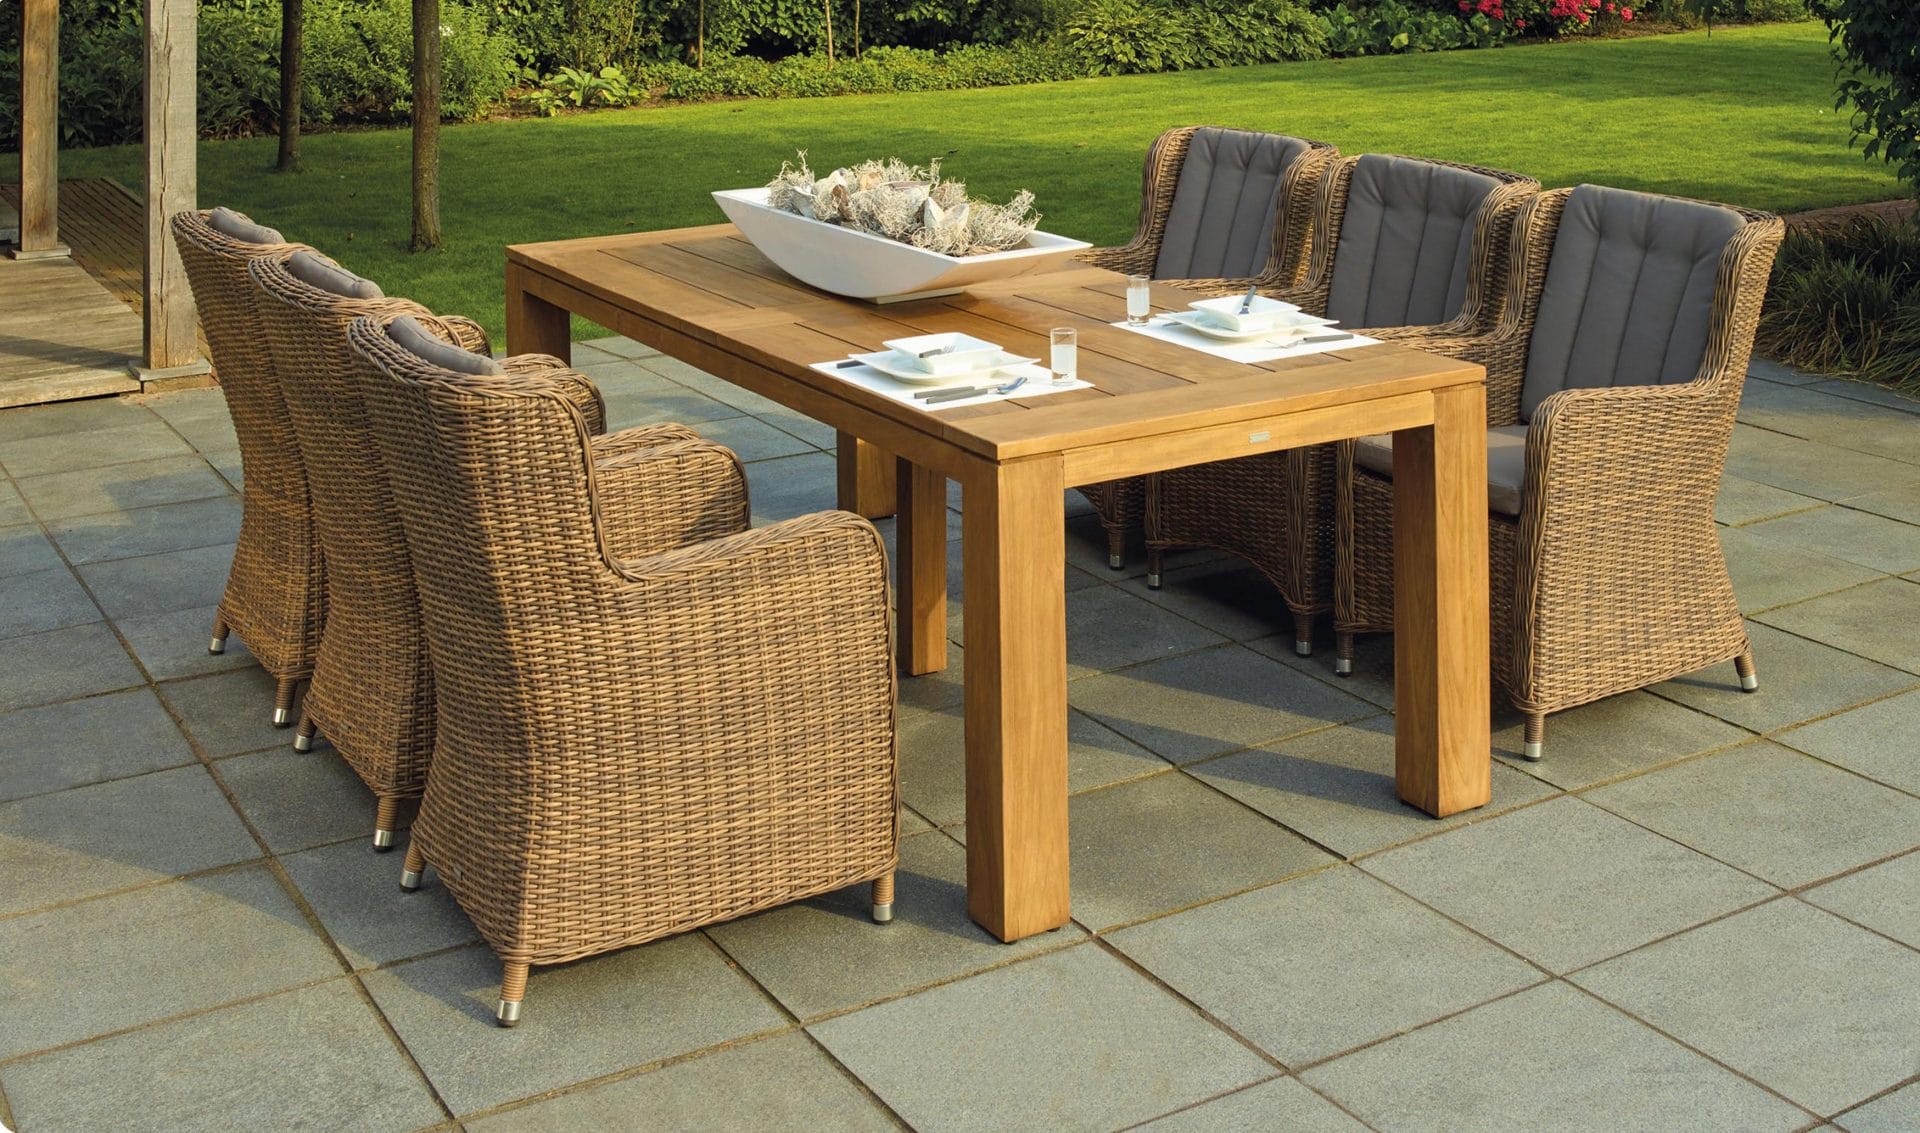 Pick patio designs that you love and make it a reality in your outdoor living space.